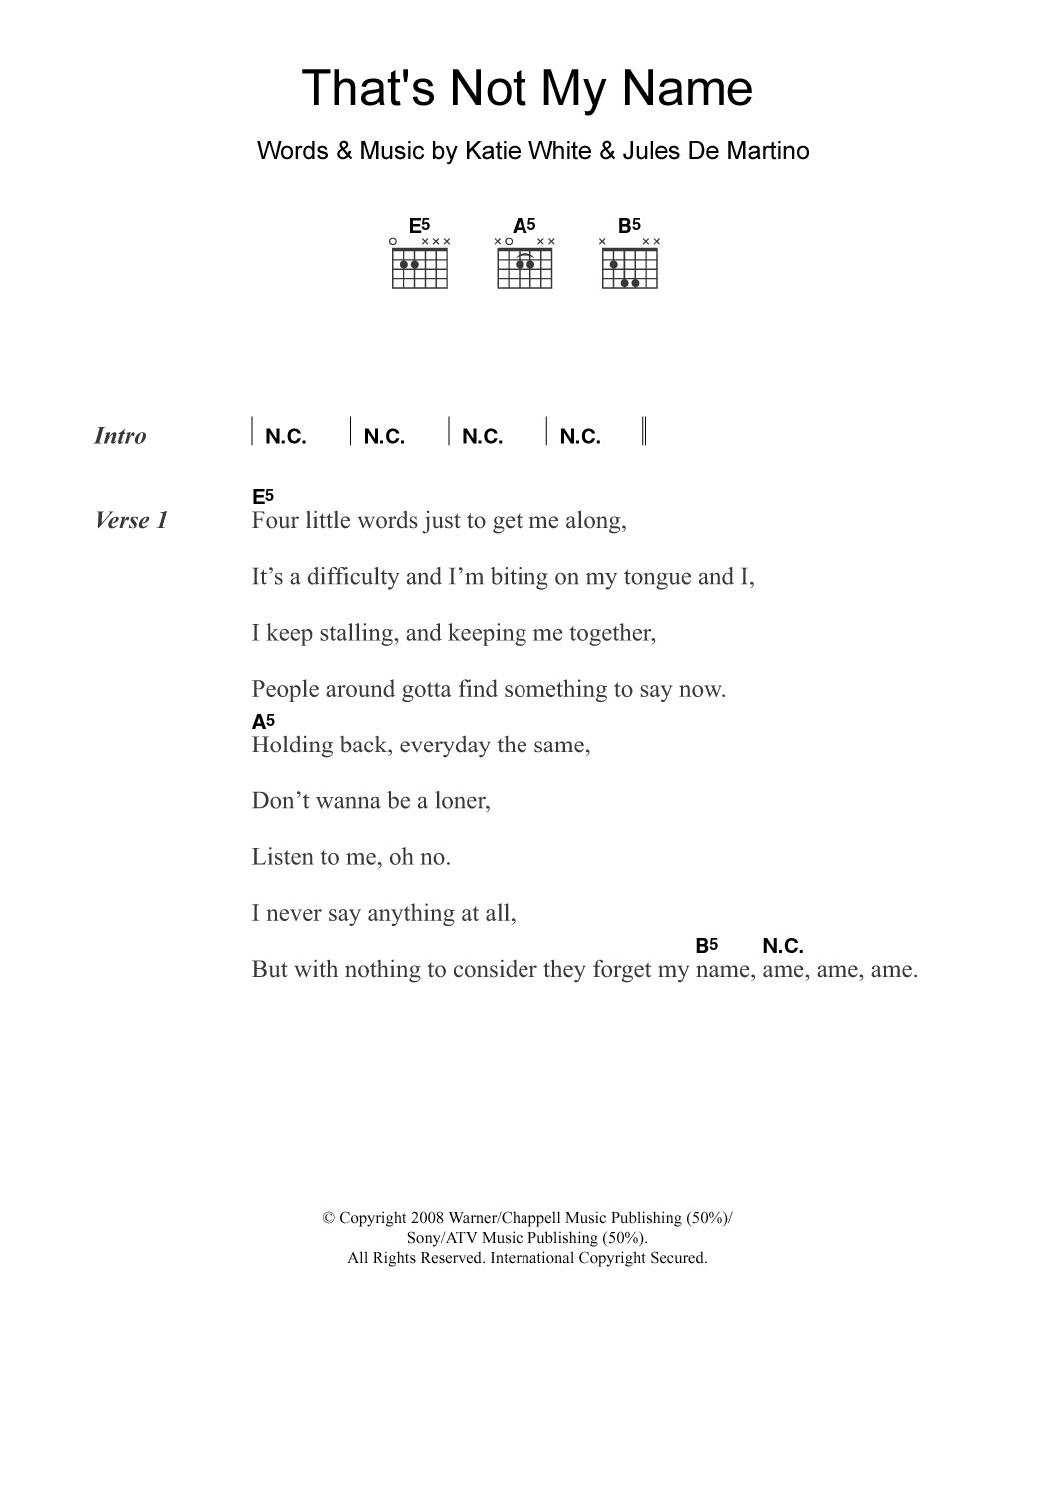 Download The Ting Tings That's Not My Name Sheet Music